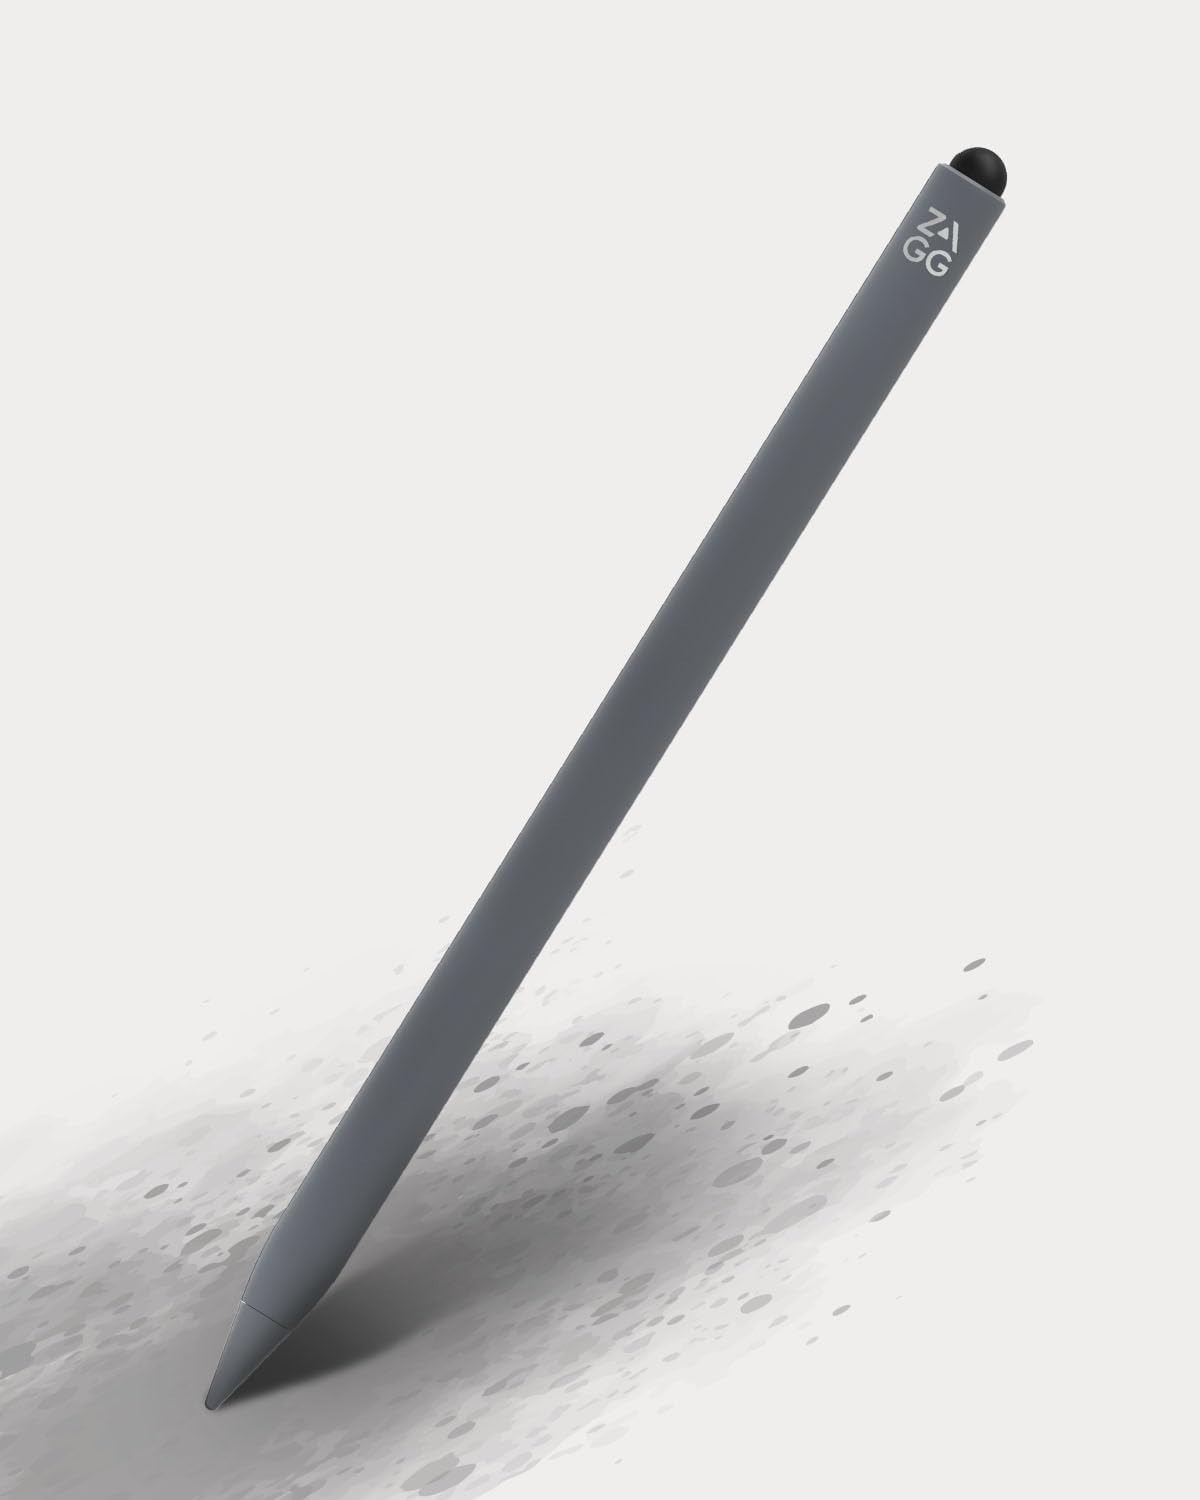 ZAGG Pro Stylus 2 for iPad w/ Wireless Charging & Magnetic Attachment (Various Colors) $52.14 + Free Shipping